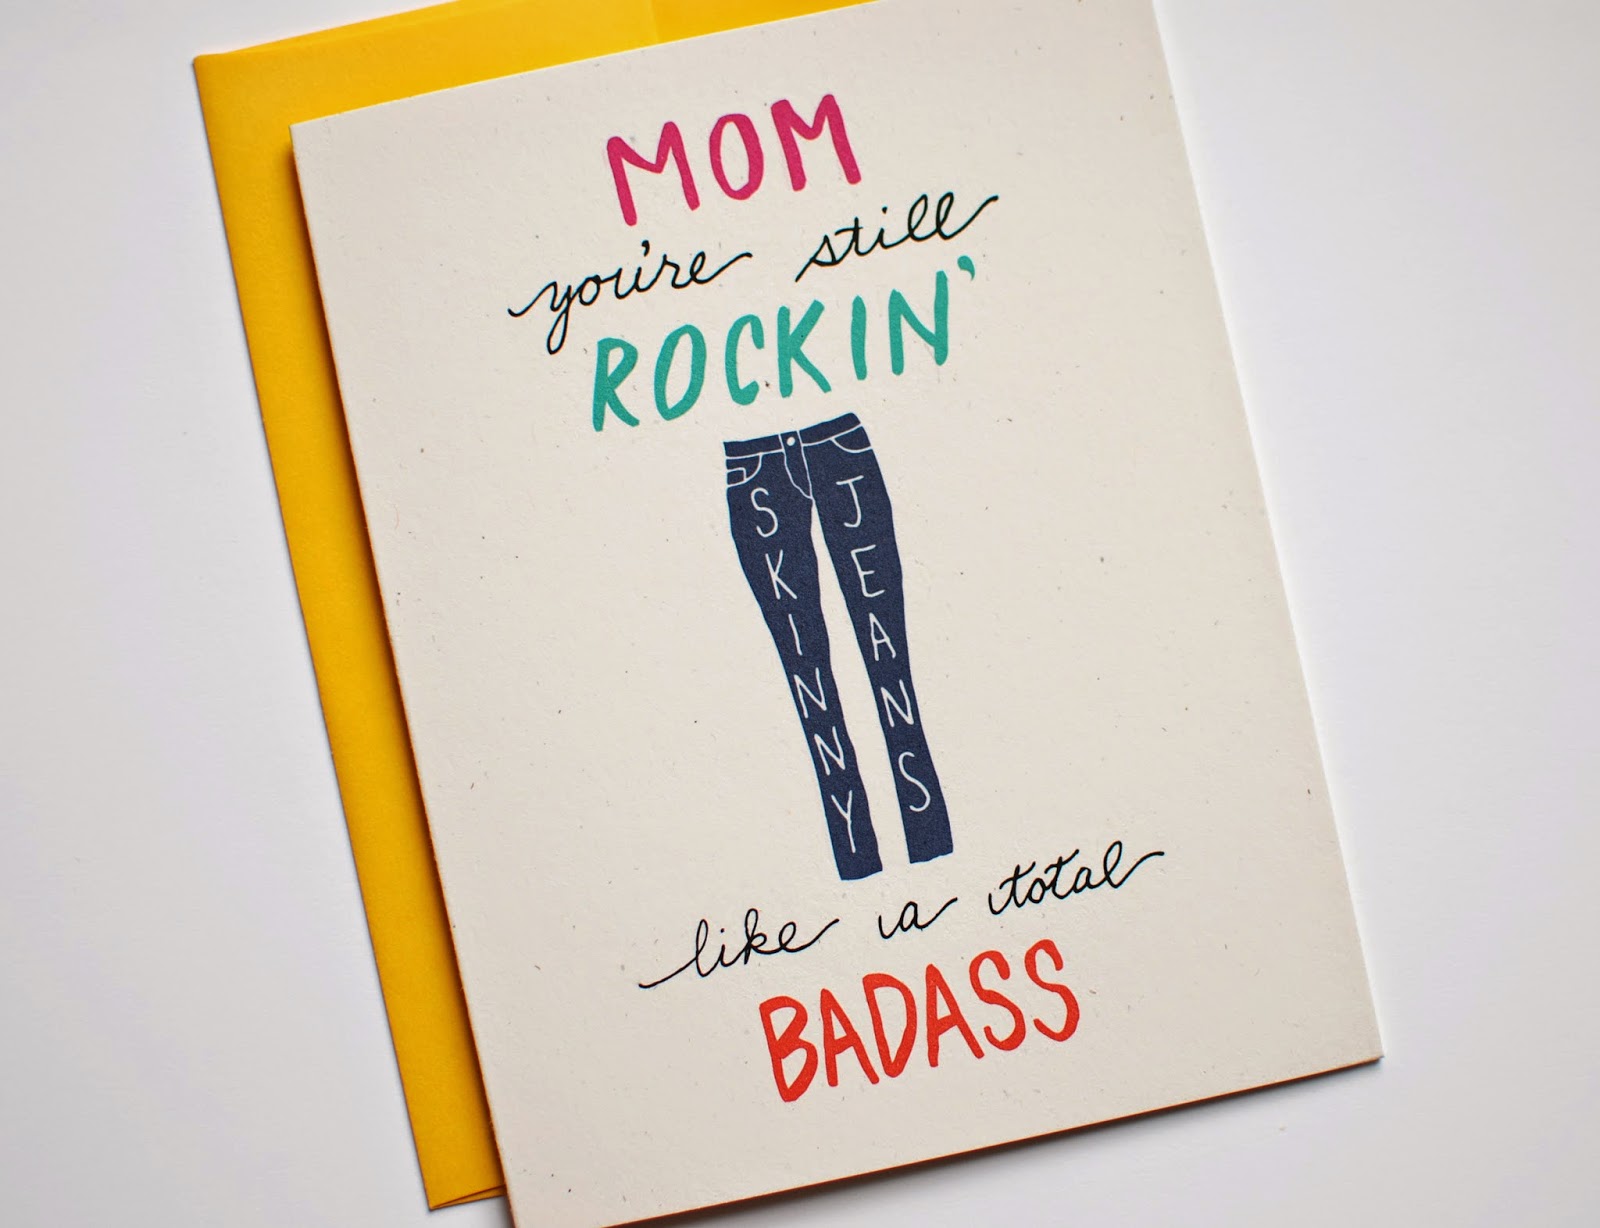 https://www.etsy.com/listing/183122899/funny-mothers-day-card-mothers-day-card?ref=related-0